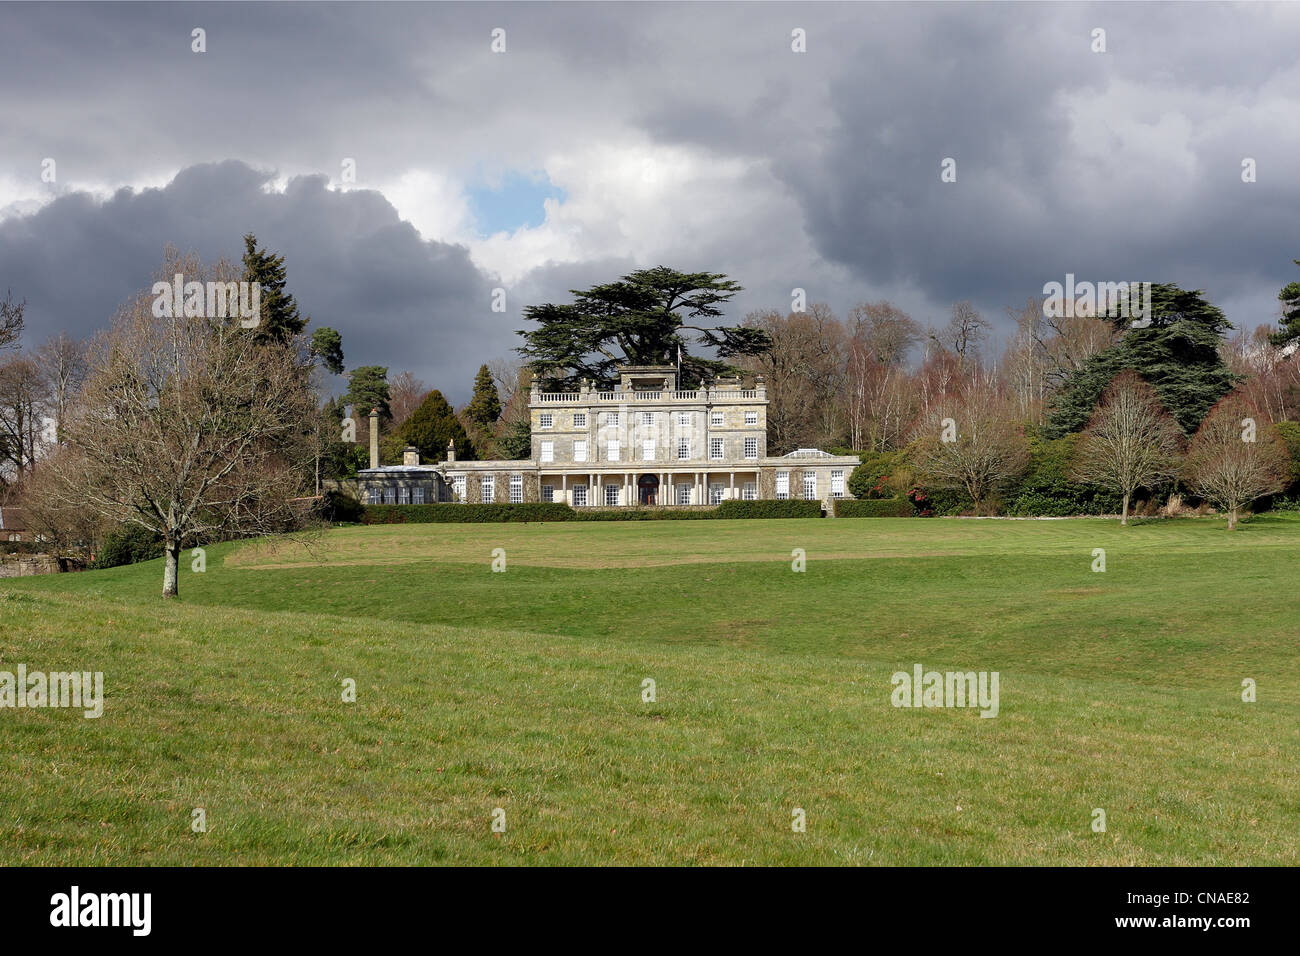 Saint Hill Manor House, der Scientology Kirche in East Grinstead, England Stockfoto